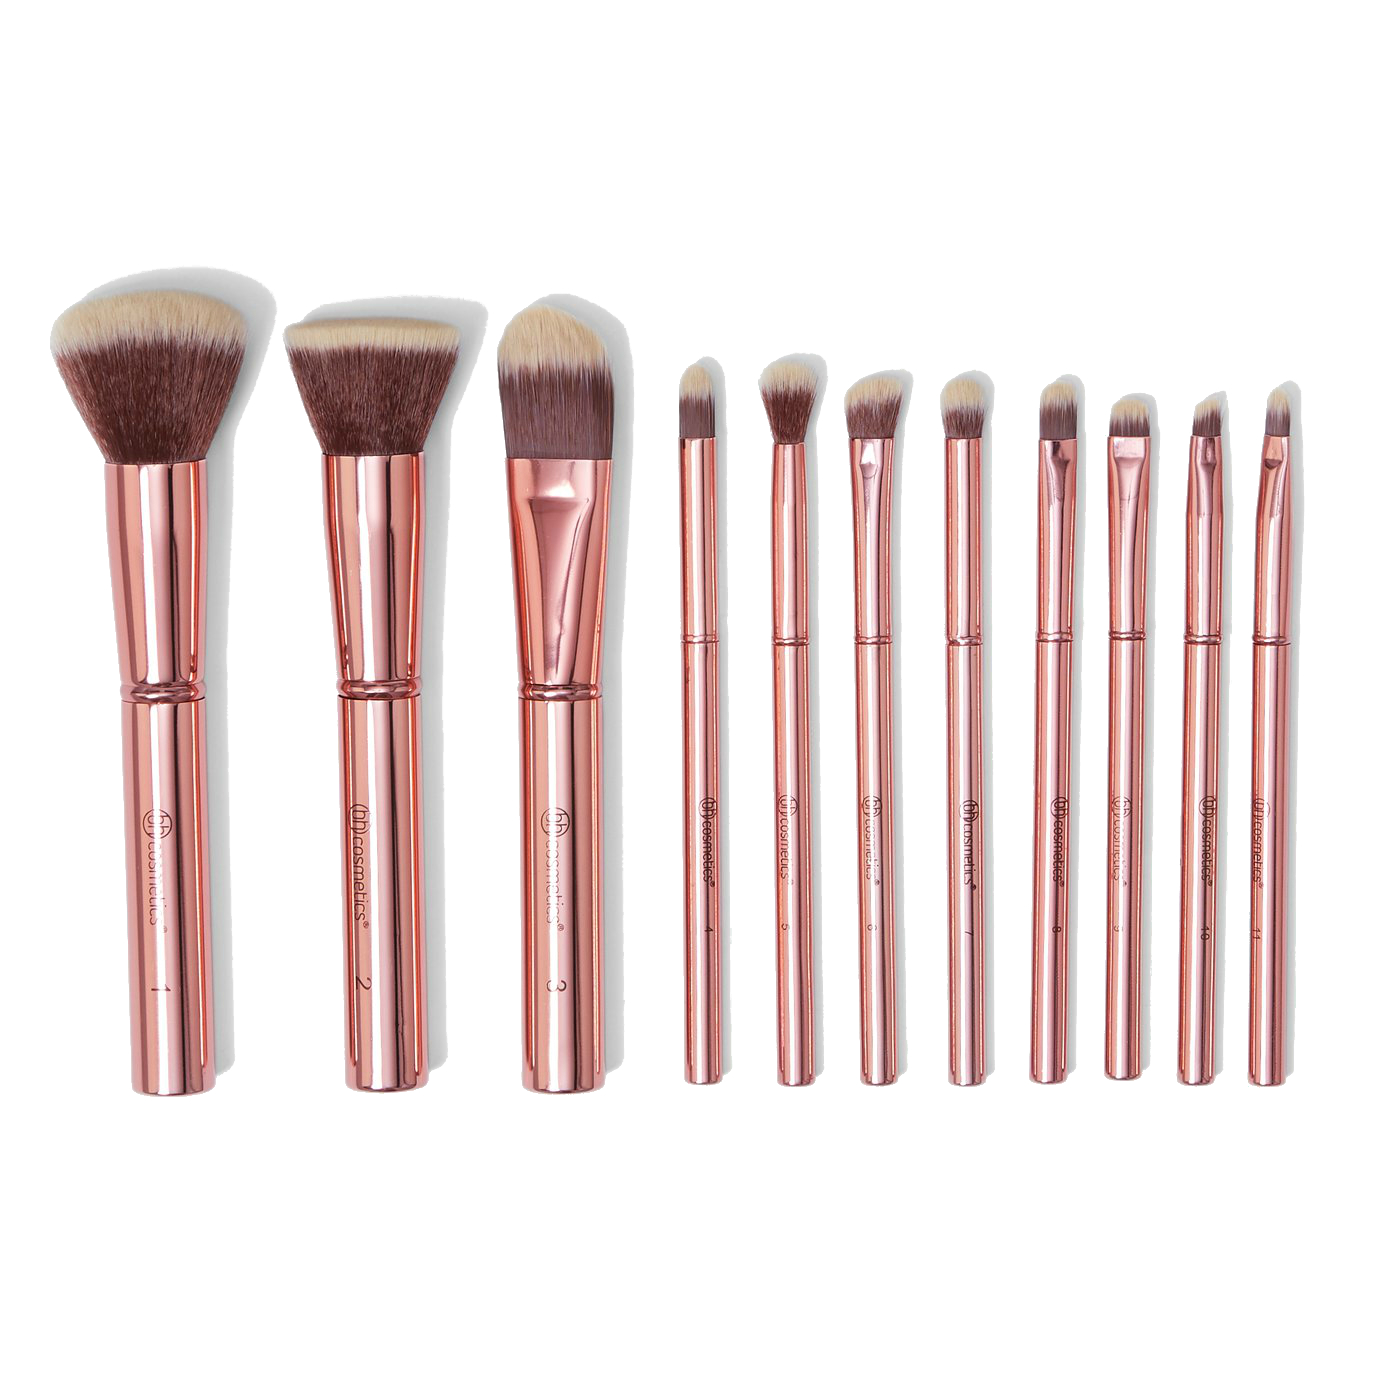 bh cosmetics metal rose brushes winter christmas holiday shopping gift ideas | Ethical Bunny's cruelty free and vegan brand list with skincare, makeup, haircare, hygiene, bath and body guides. Featuring indie, clean, green, sustainable, non toxic, organic, botanical and natural products.